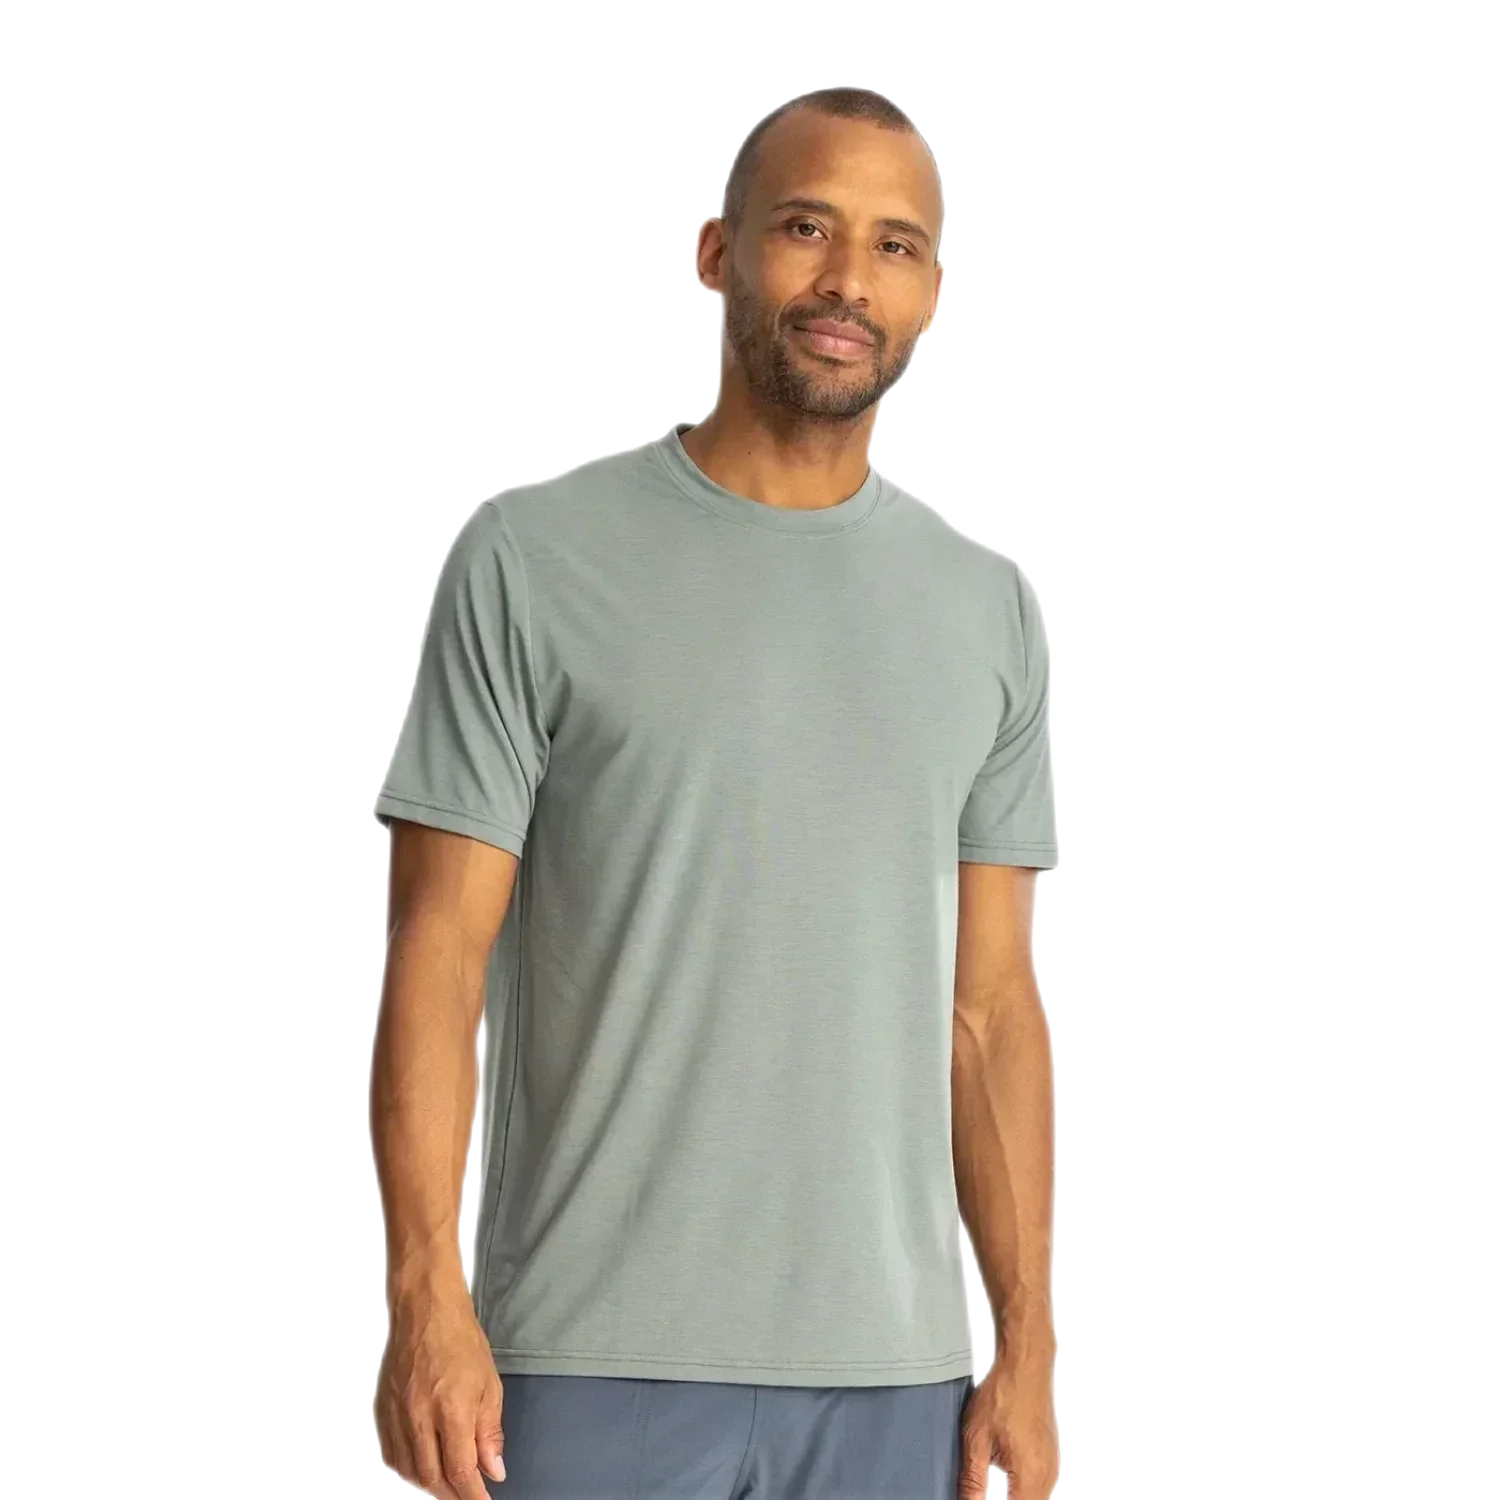 Free Fly Apparel 01. MENS APPAREL - MENS T-SHIRTS - MENS T-SHIRT SS Men's Elevate Lightweight Tee AGAVE GREEN